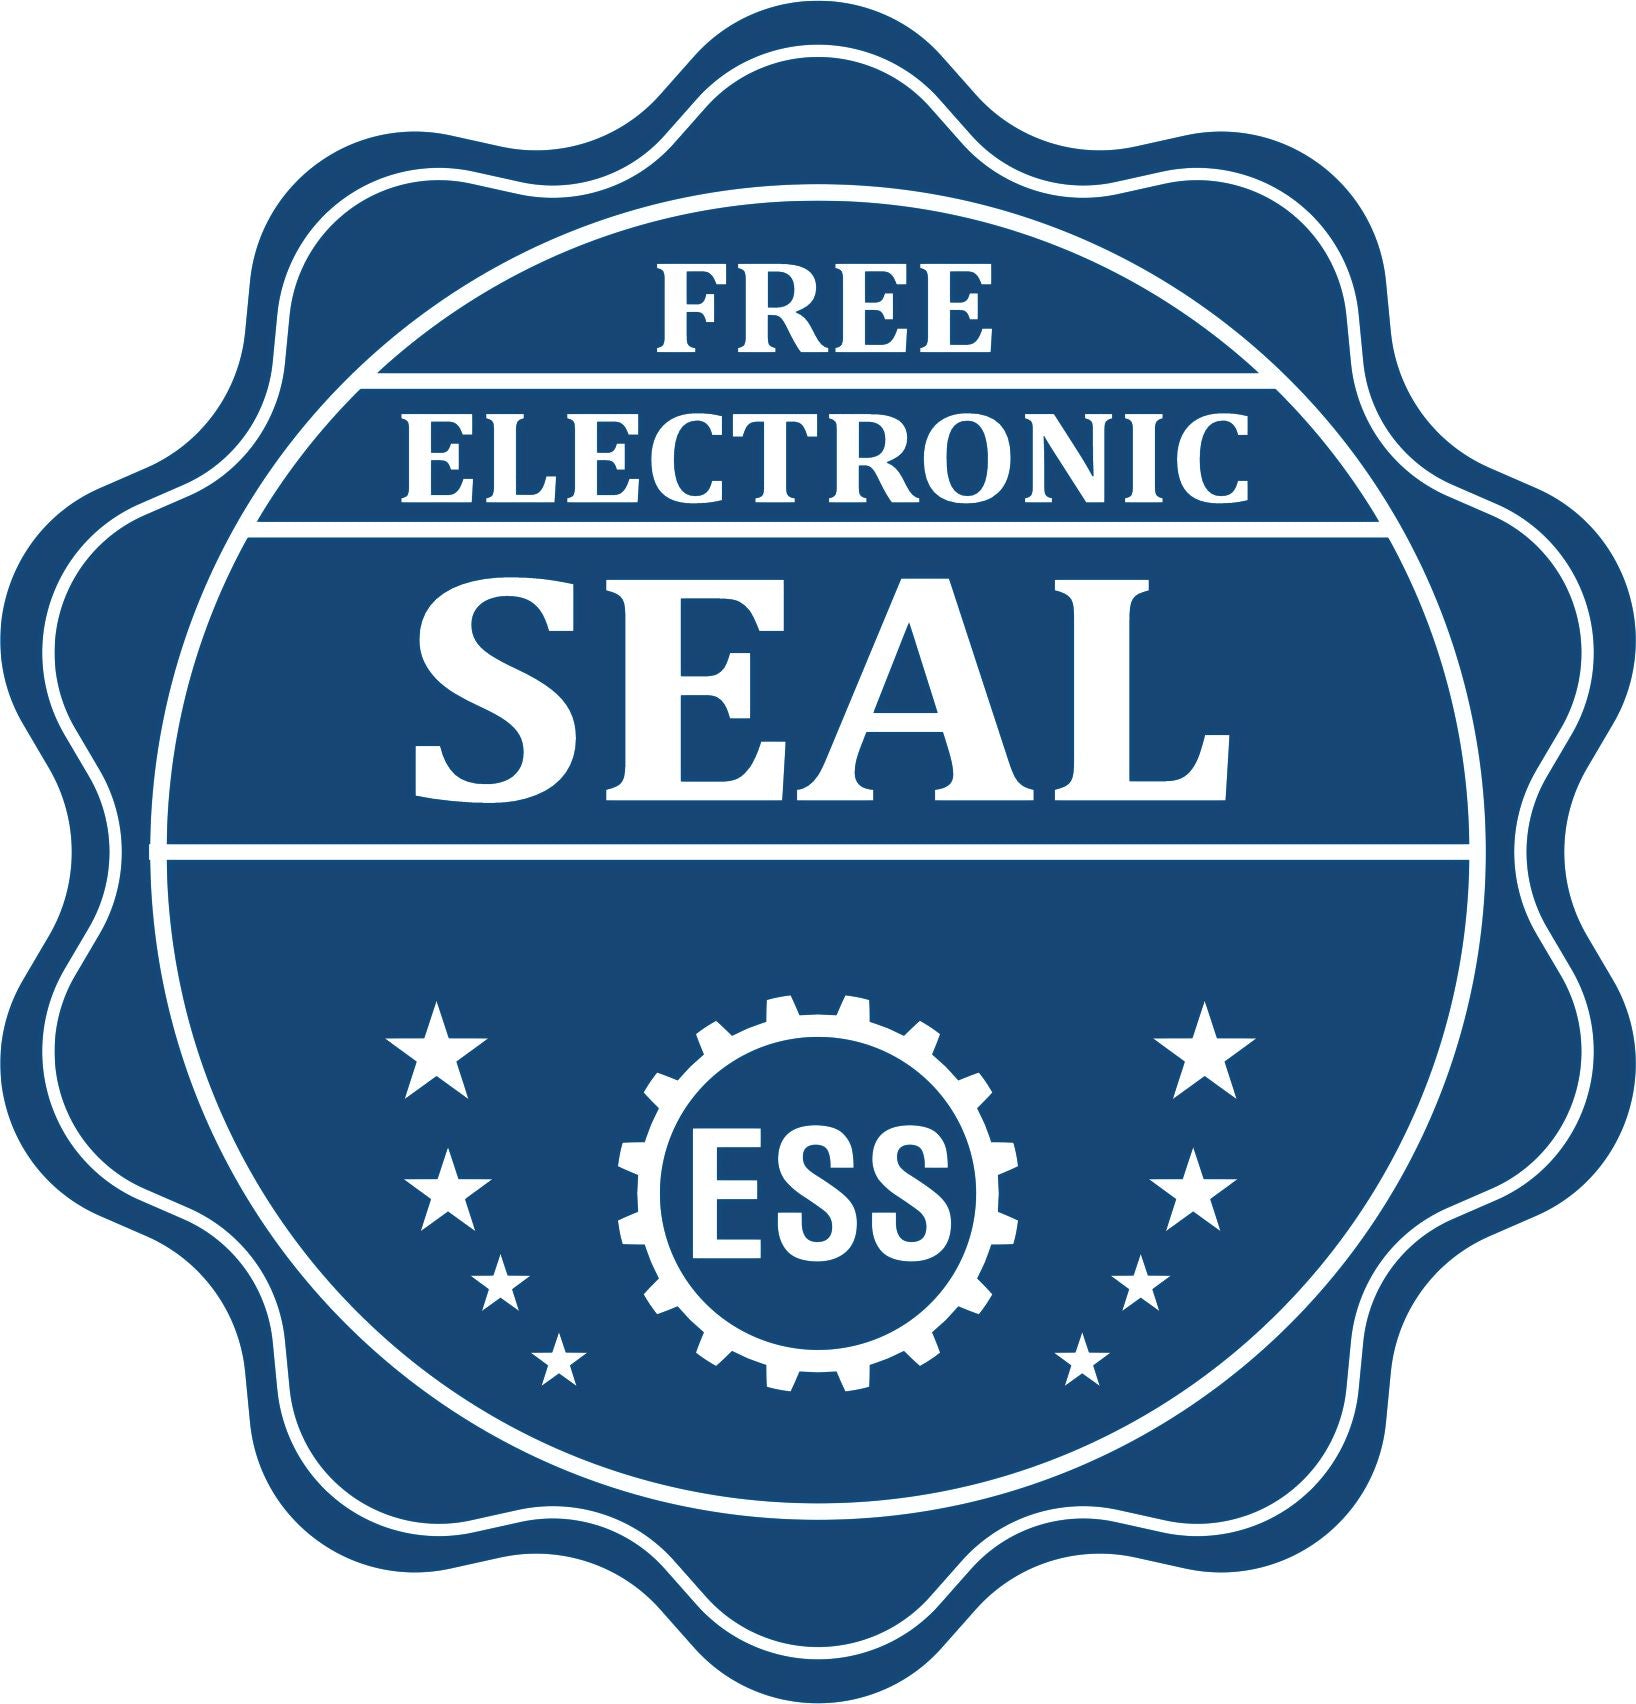 A badge showing a free electronic seal for the Soft California Professional Engineer Seal with stars and the ESS gear on the emblem.